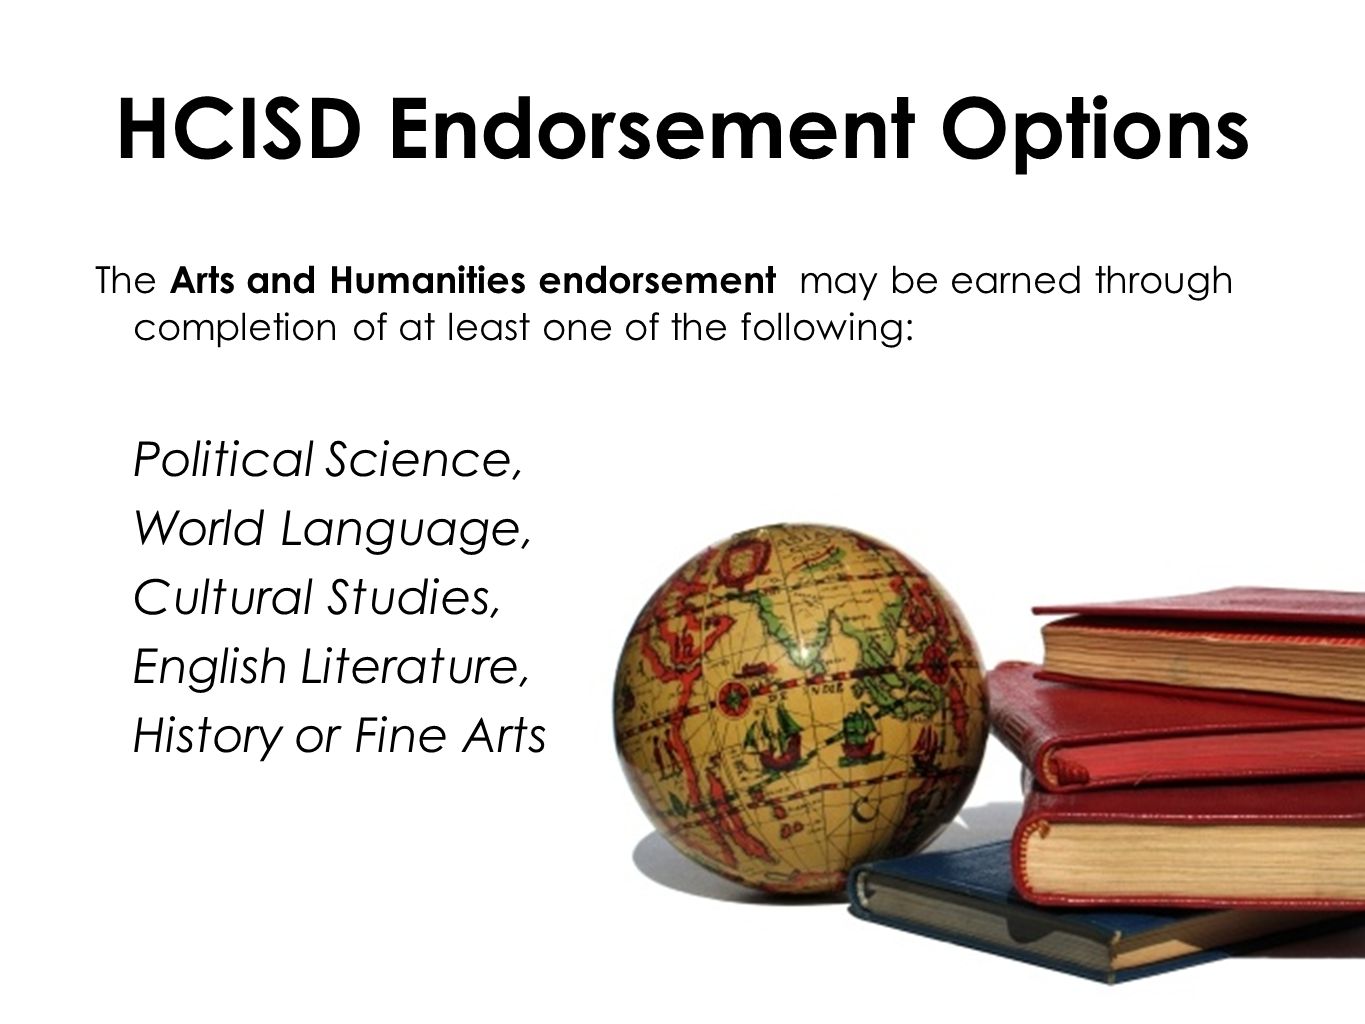 HCISD Endorsement Options The Arts and Humanities endorsement may be earned through completion of at least one of the following: Political Science, World Language, Cultural Studies, English Literature, History or Fine Arts